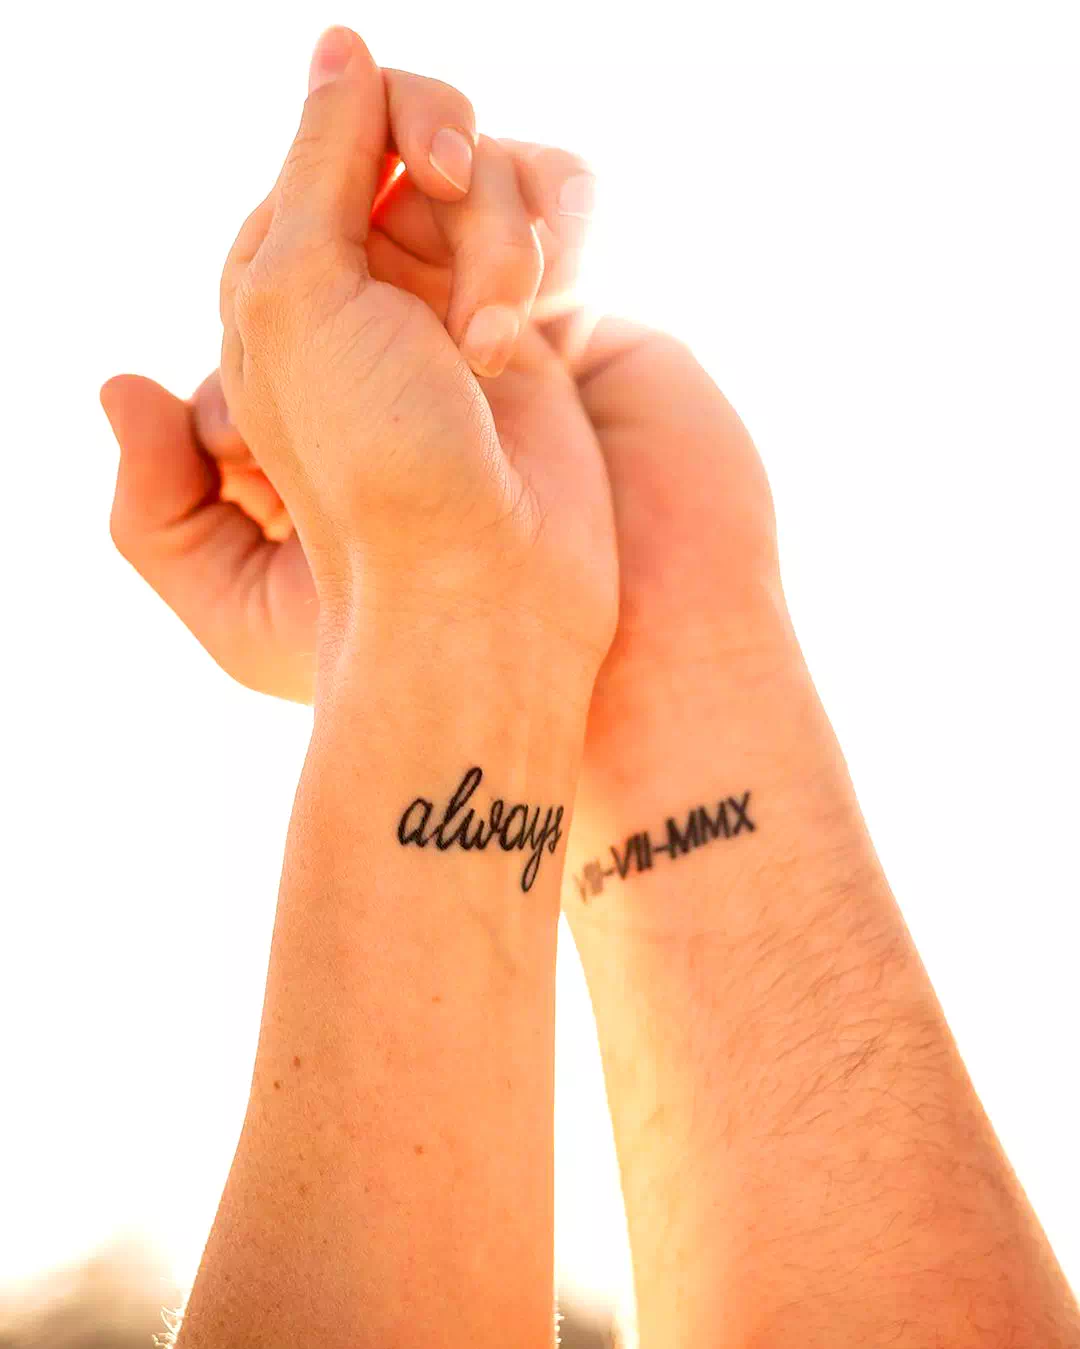 Meaningful Words Wedding Ring Tattoo 3